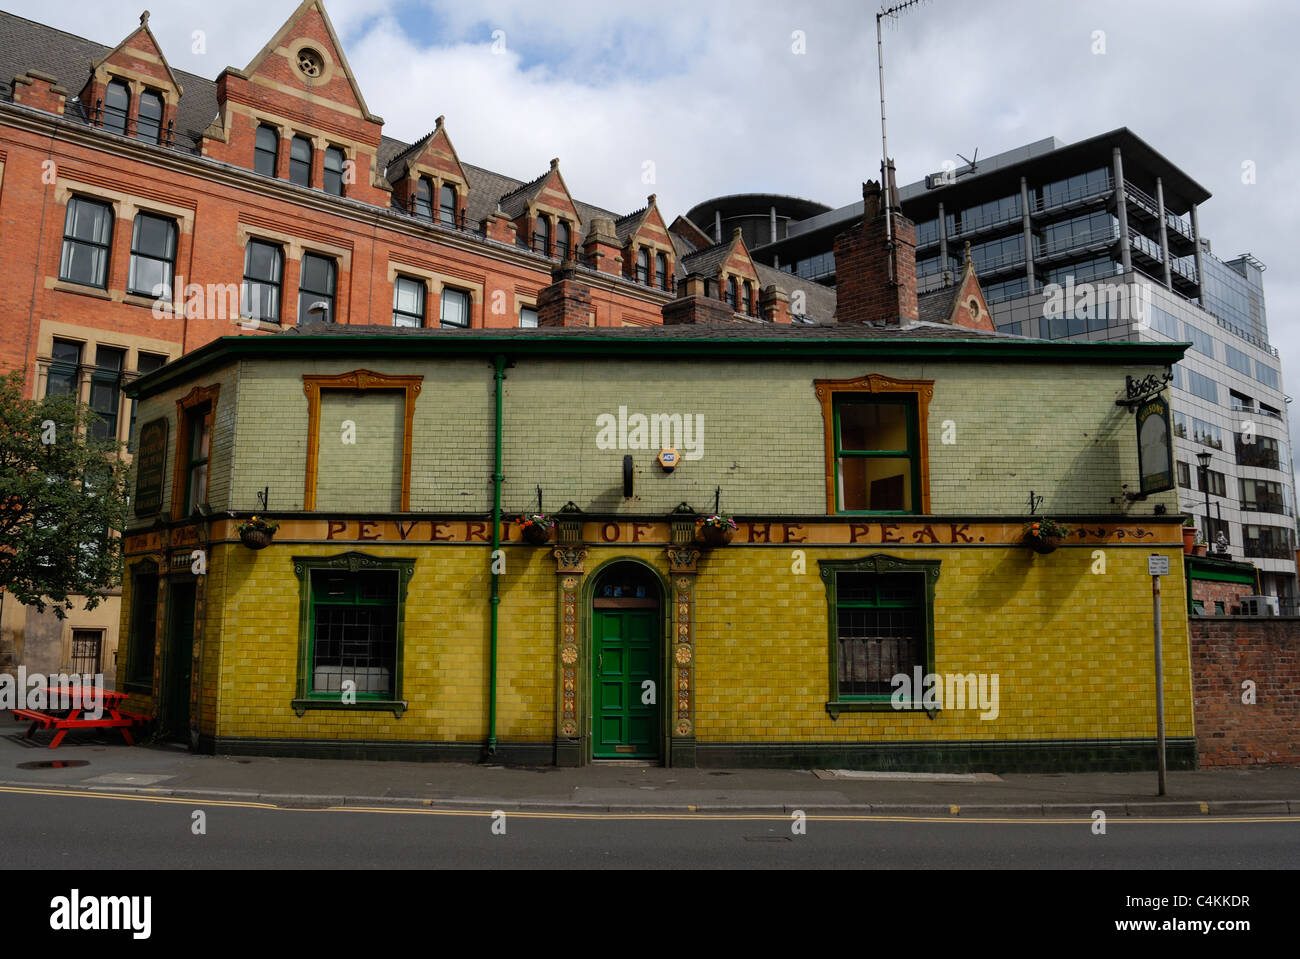 The Peveril of the Peak public house in Manchester, a tile public house which is one of Manchesters most well known. Stock Photo